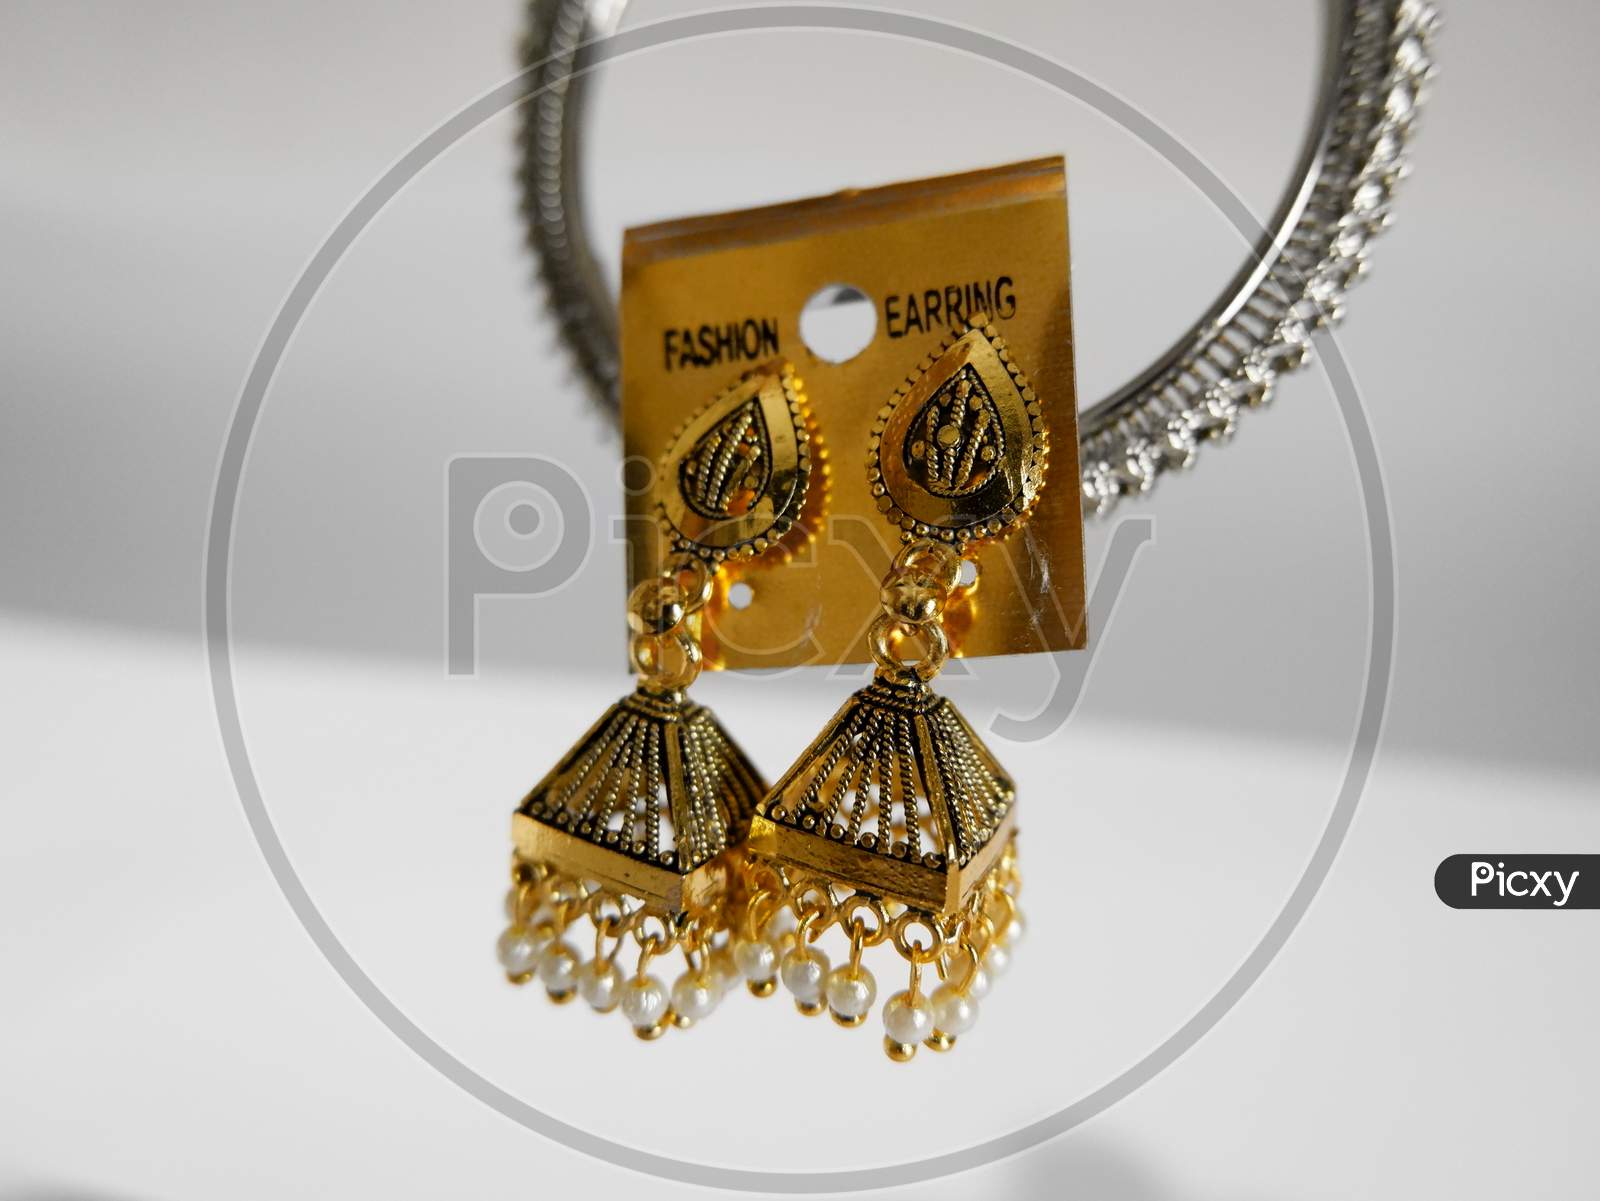 Object photography of earrings